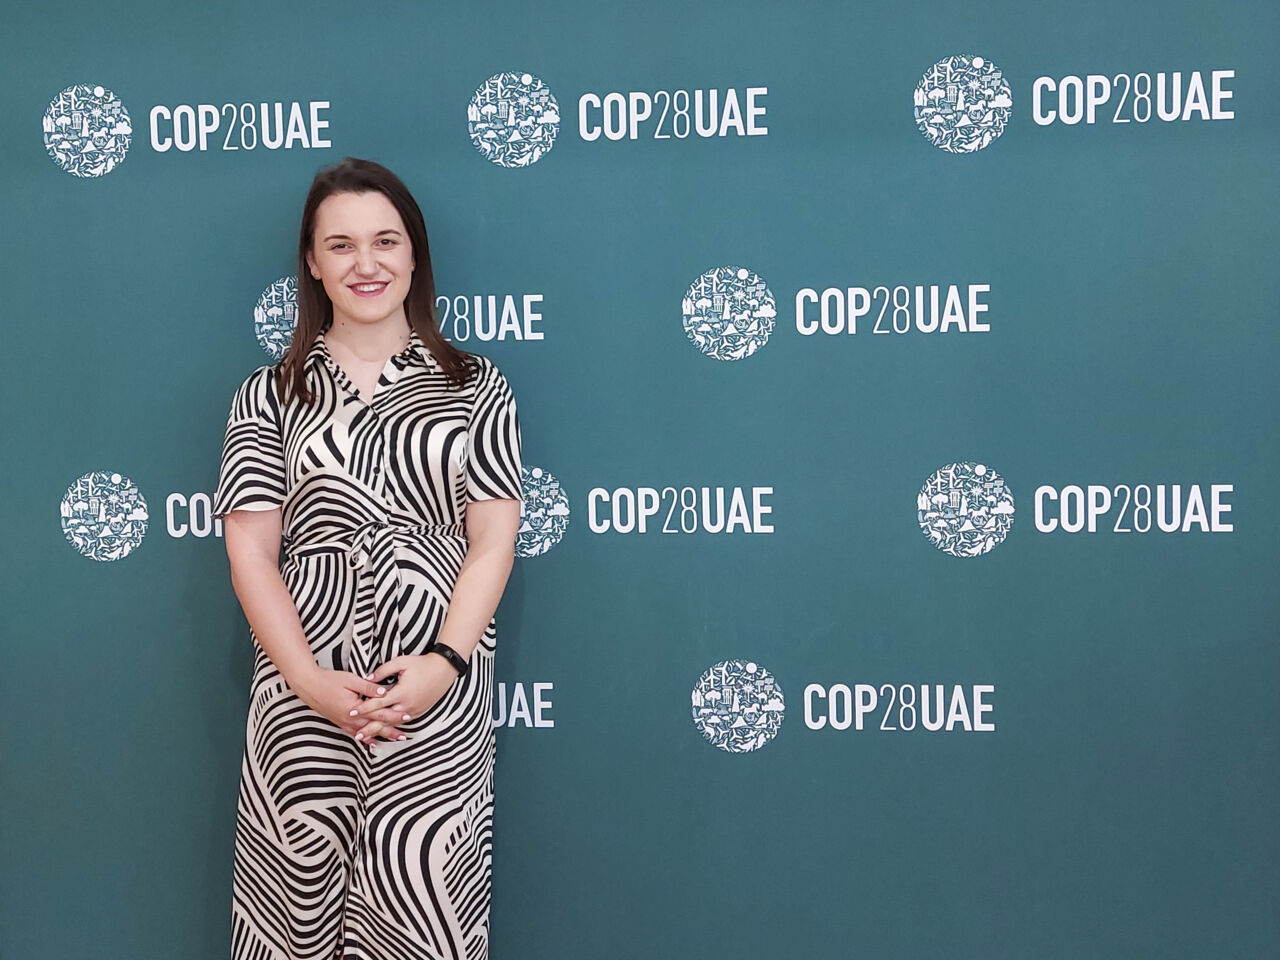 Megan Yeates, WorldSkills Kazan 2019 gold medallist in Freight Forwarding, standing in front of a COP28 billboard at the COP28 event in Dubai.